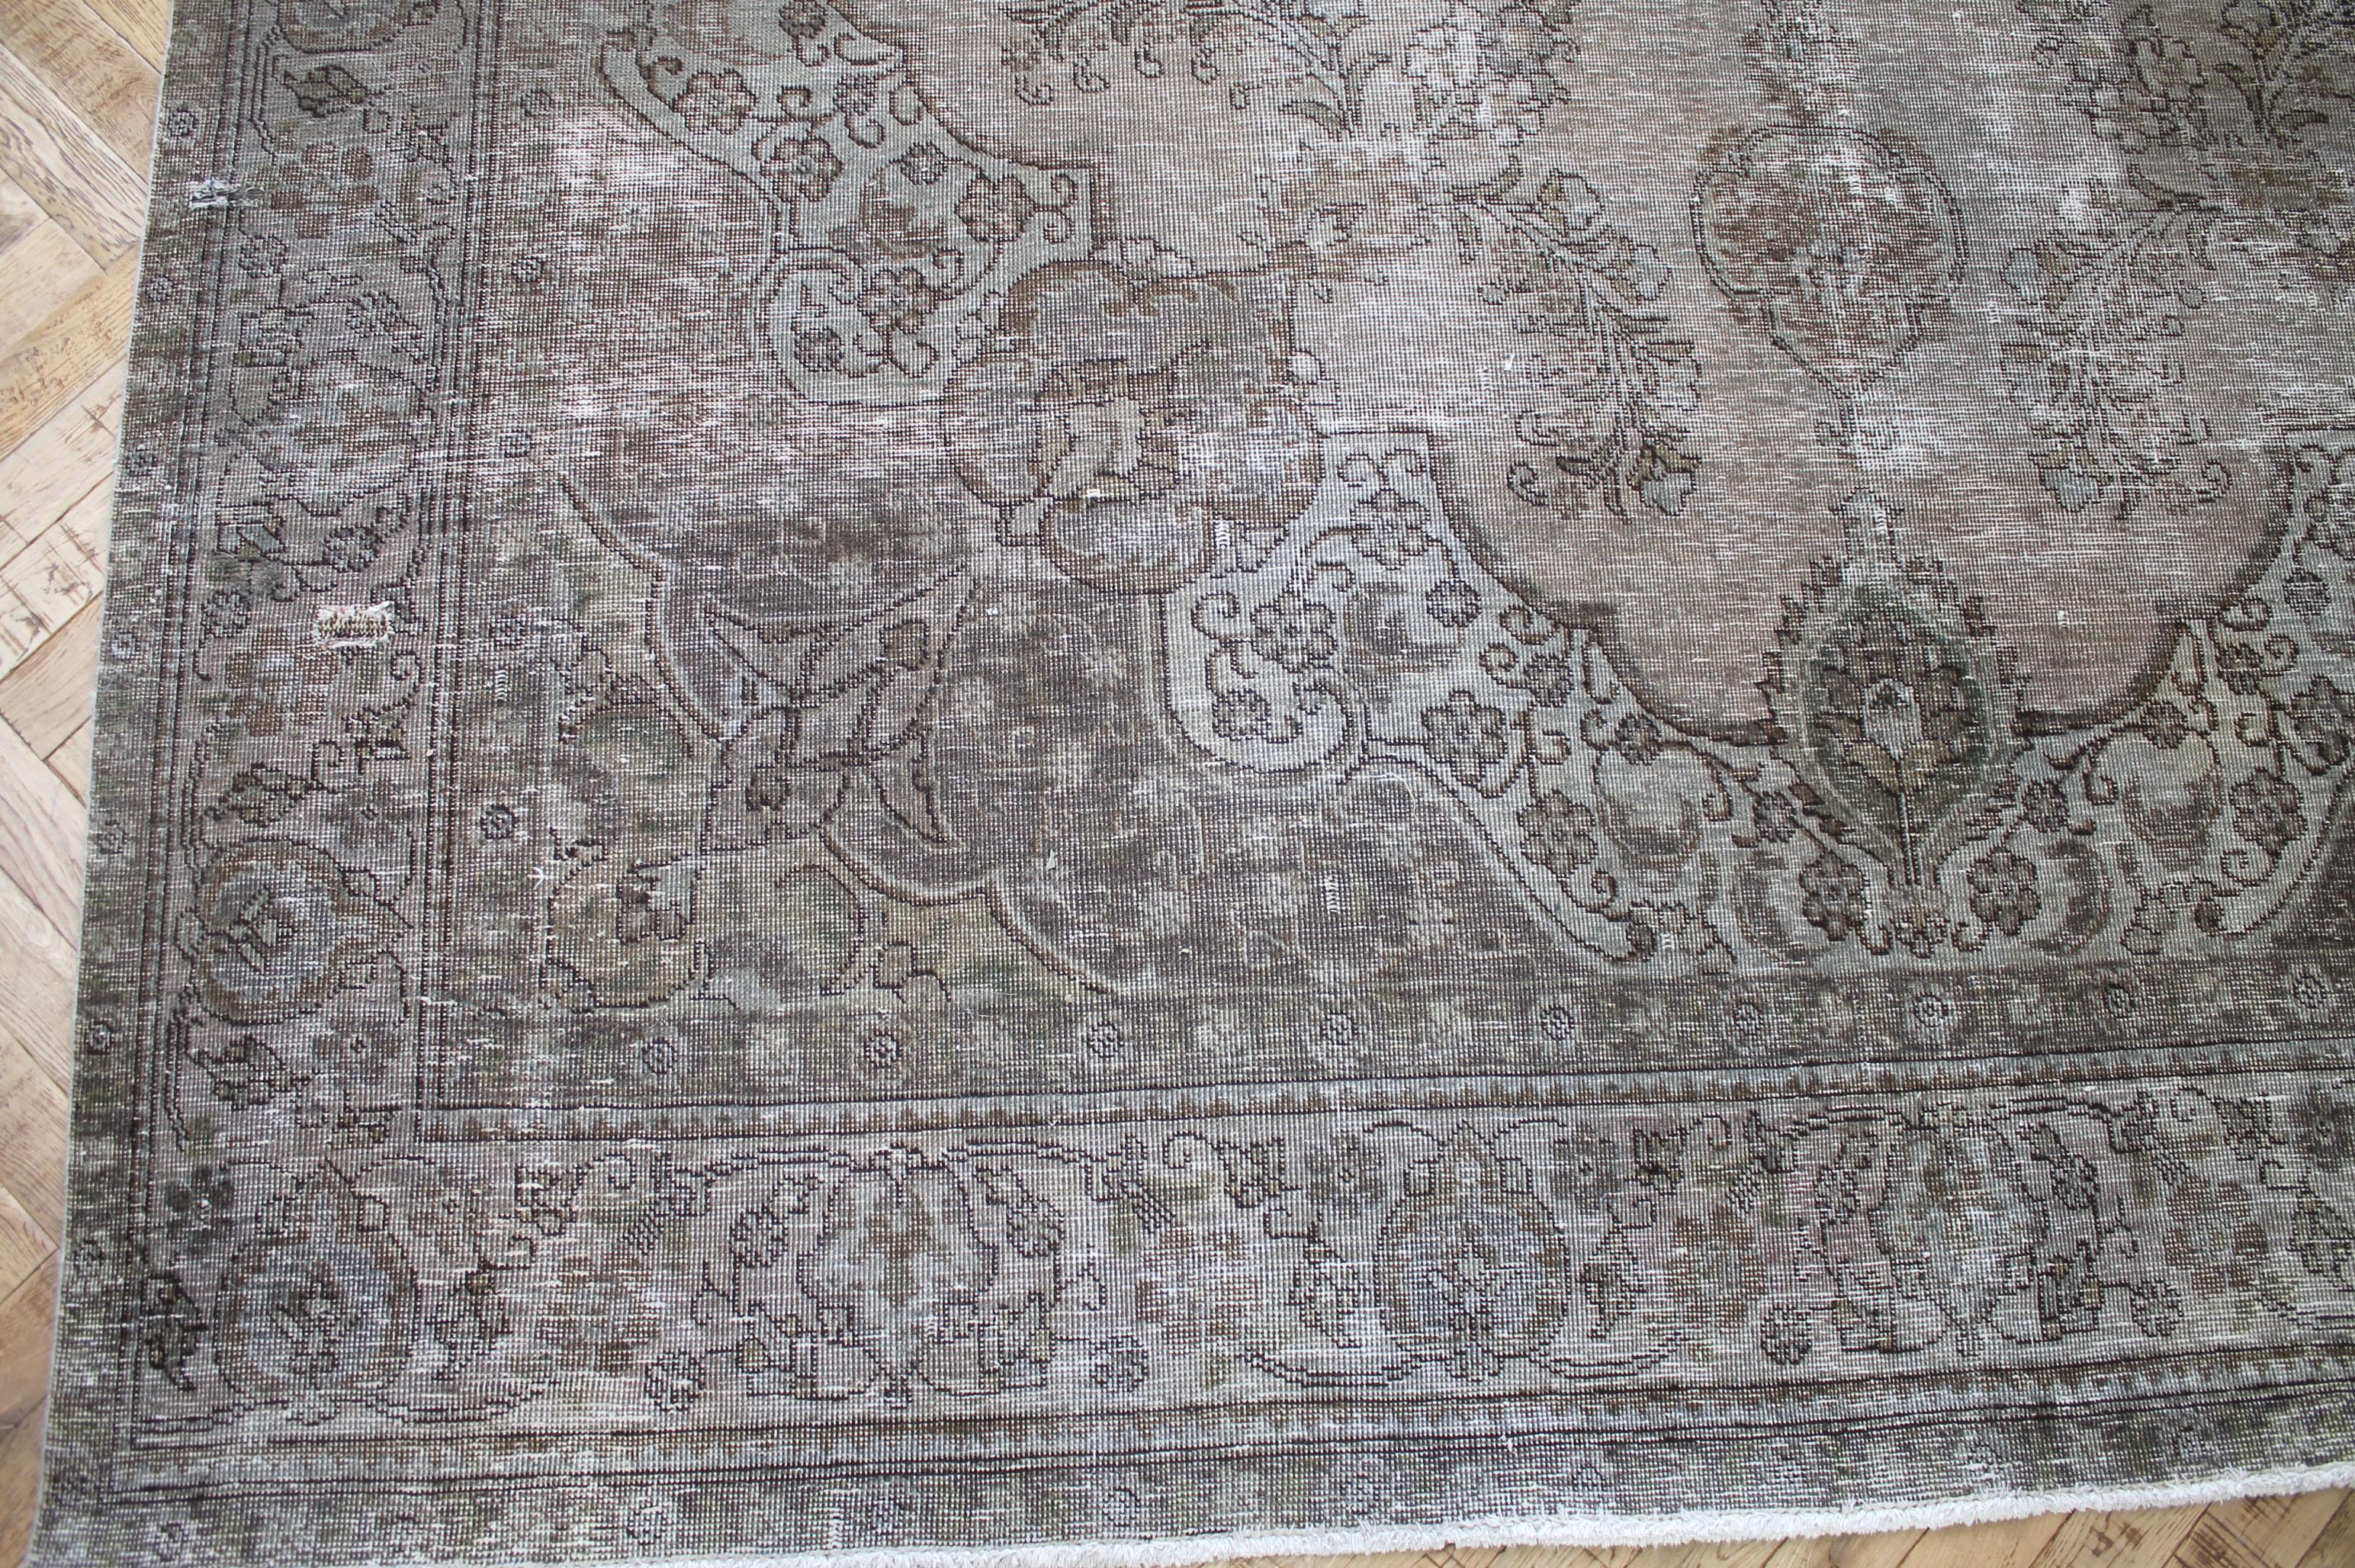 Vintage Turkish Rug in Blue Brown and Gray In Good Condition For Sale In Brea, CA